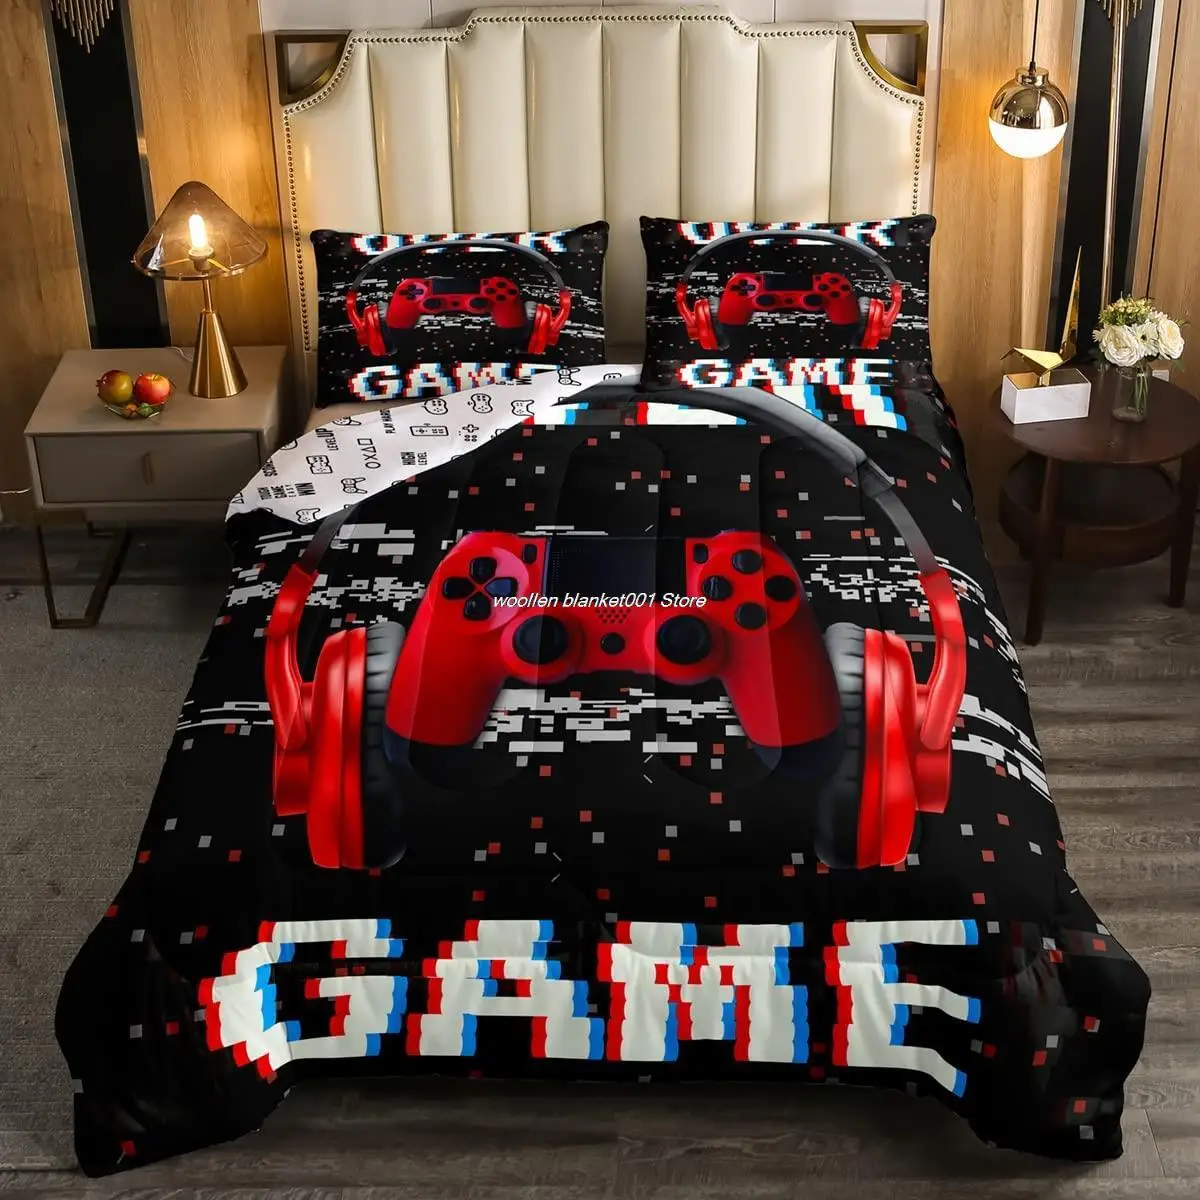 Gaming Bedding Set Game Bed Cover 135 for Adults Kids Soft Microfiber Modern Gamepad Duvet Cover Decorative with Pillowcase